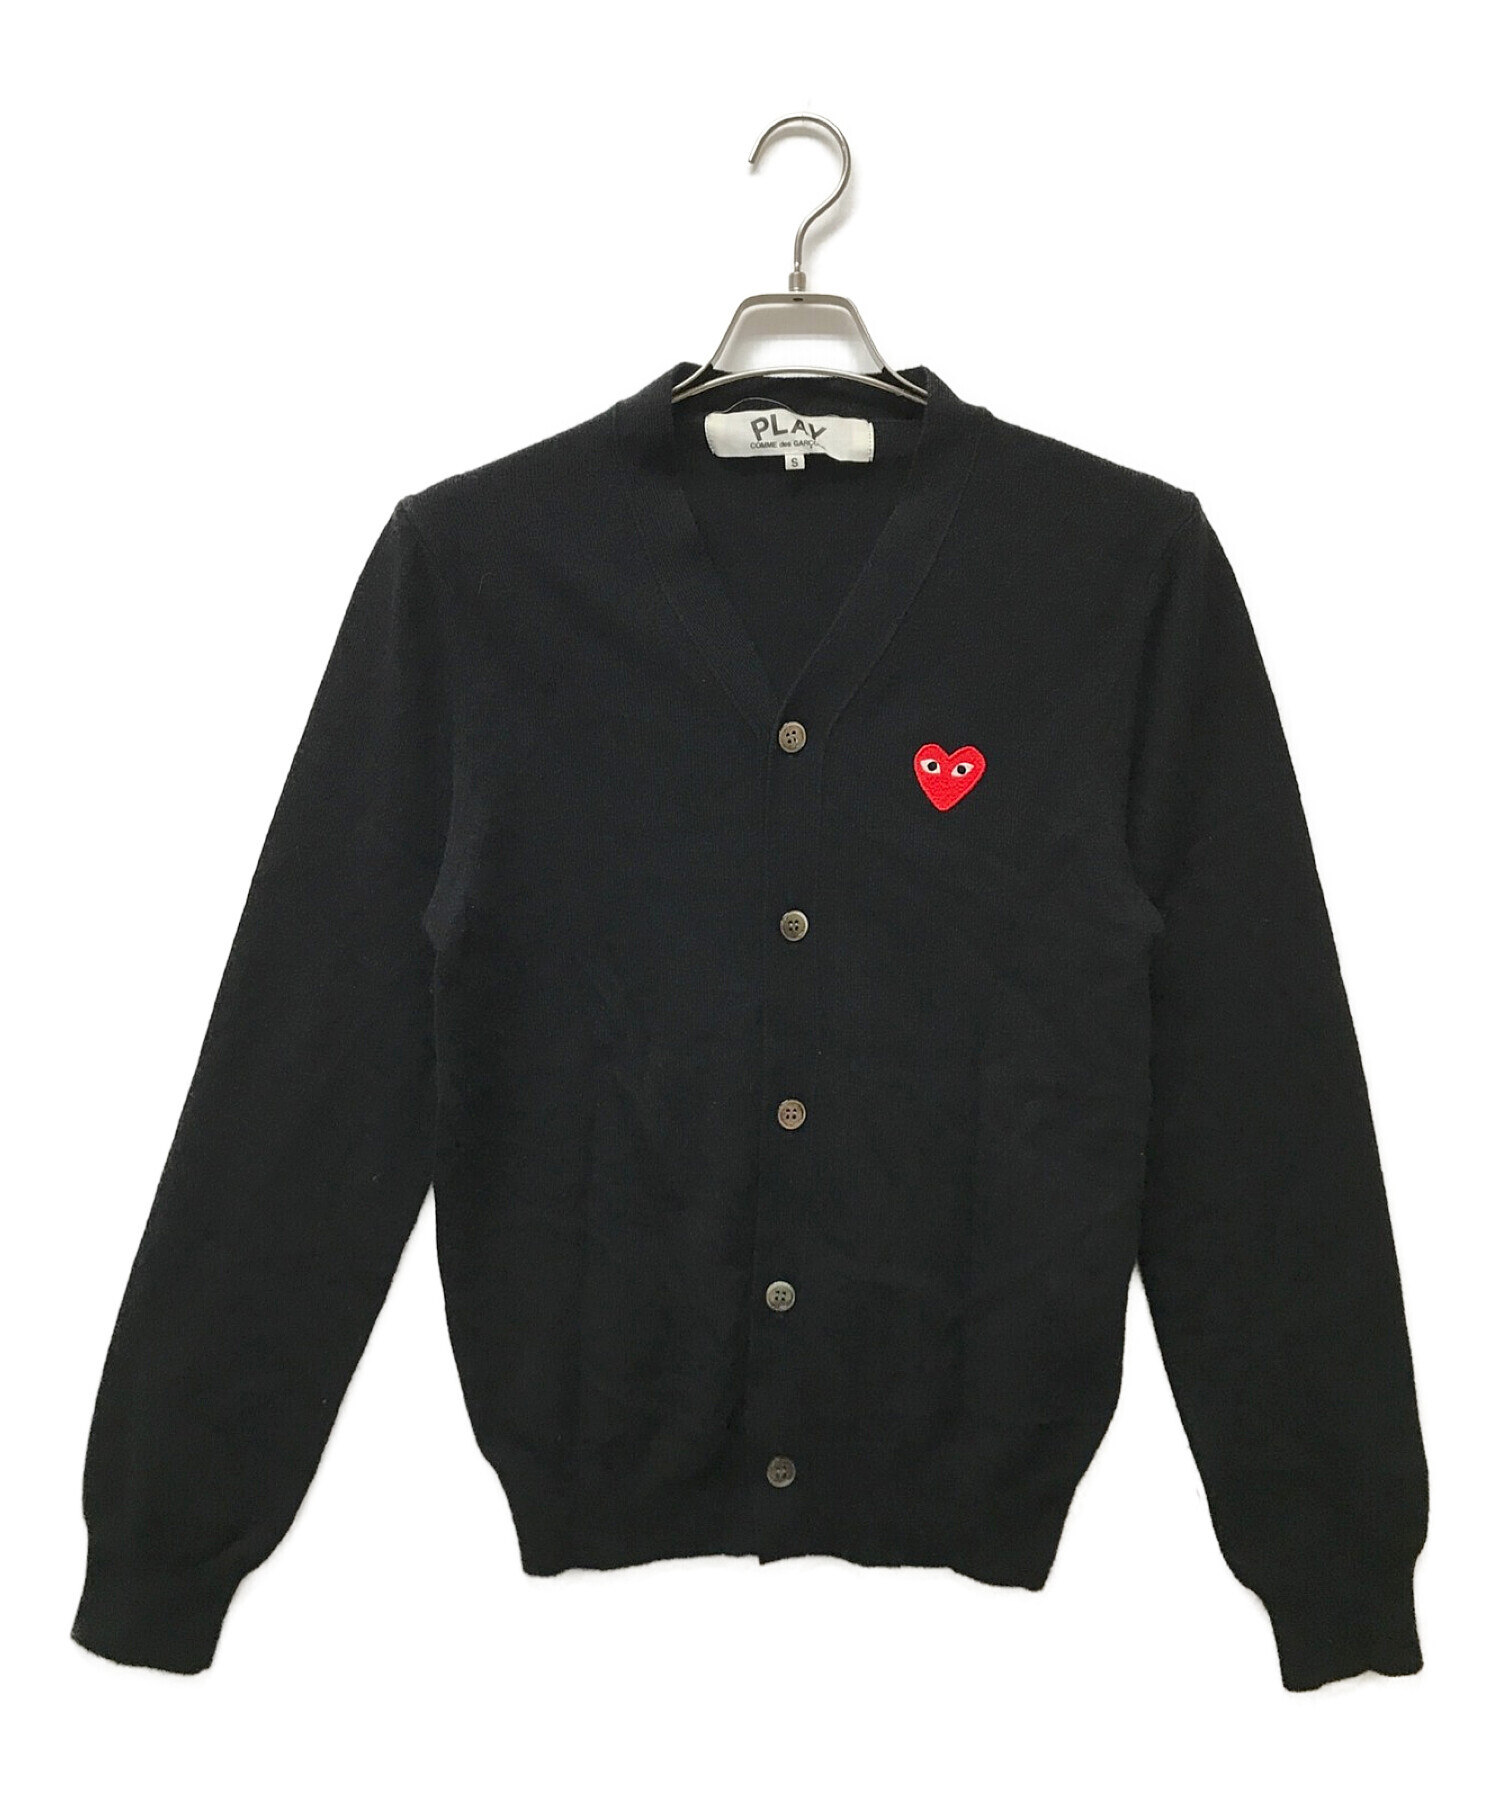 Play Comme des garcons ハート ワッペン カーディガン-